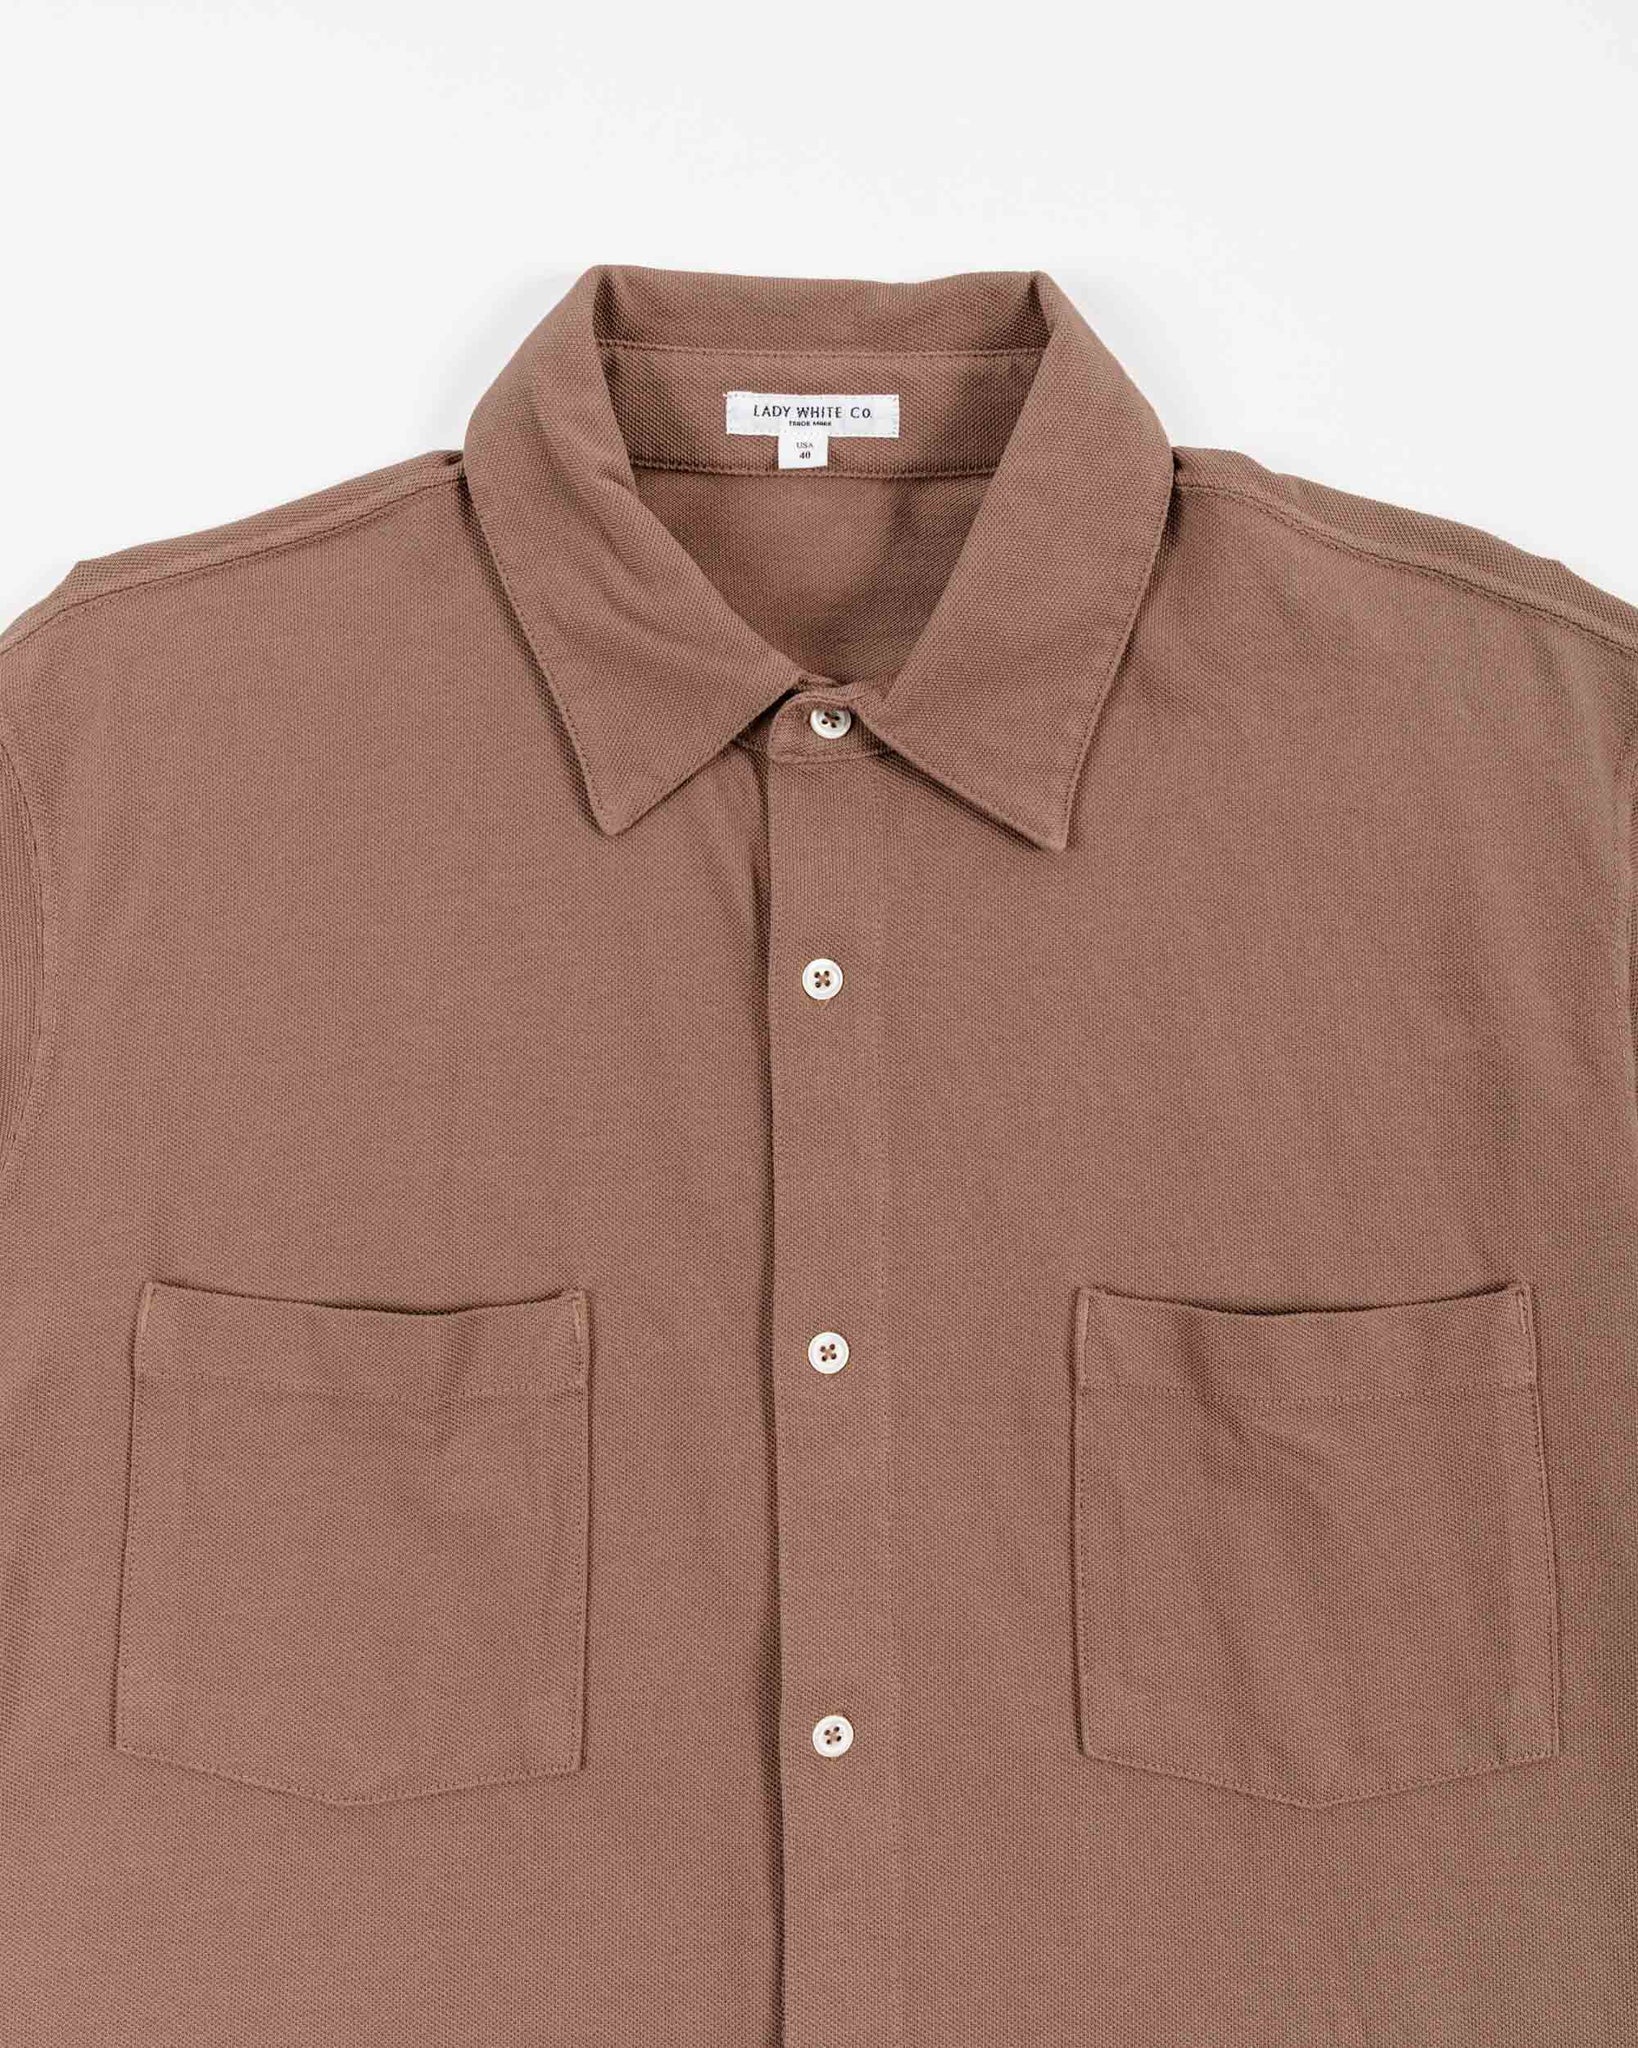 Lady White Co. Pique Work Shirt Dried Rose Details